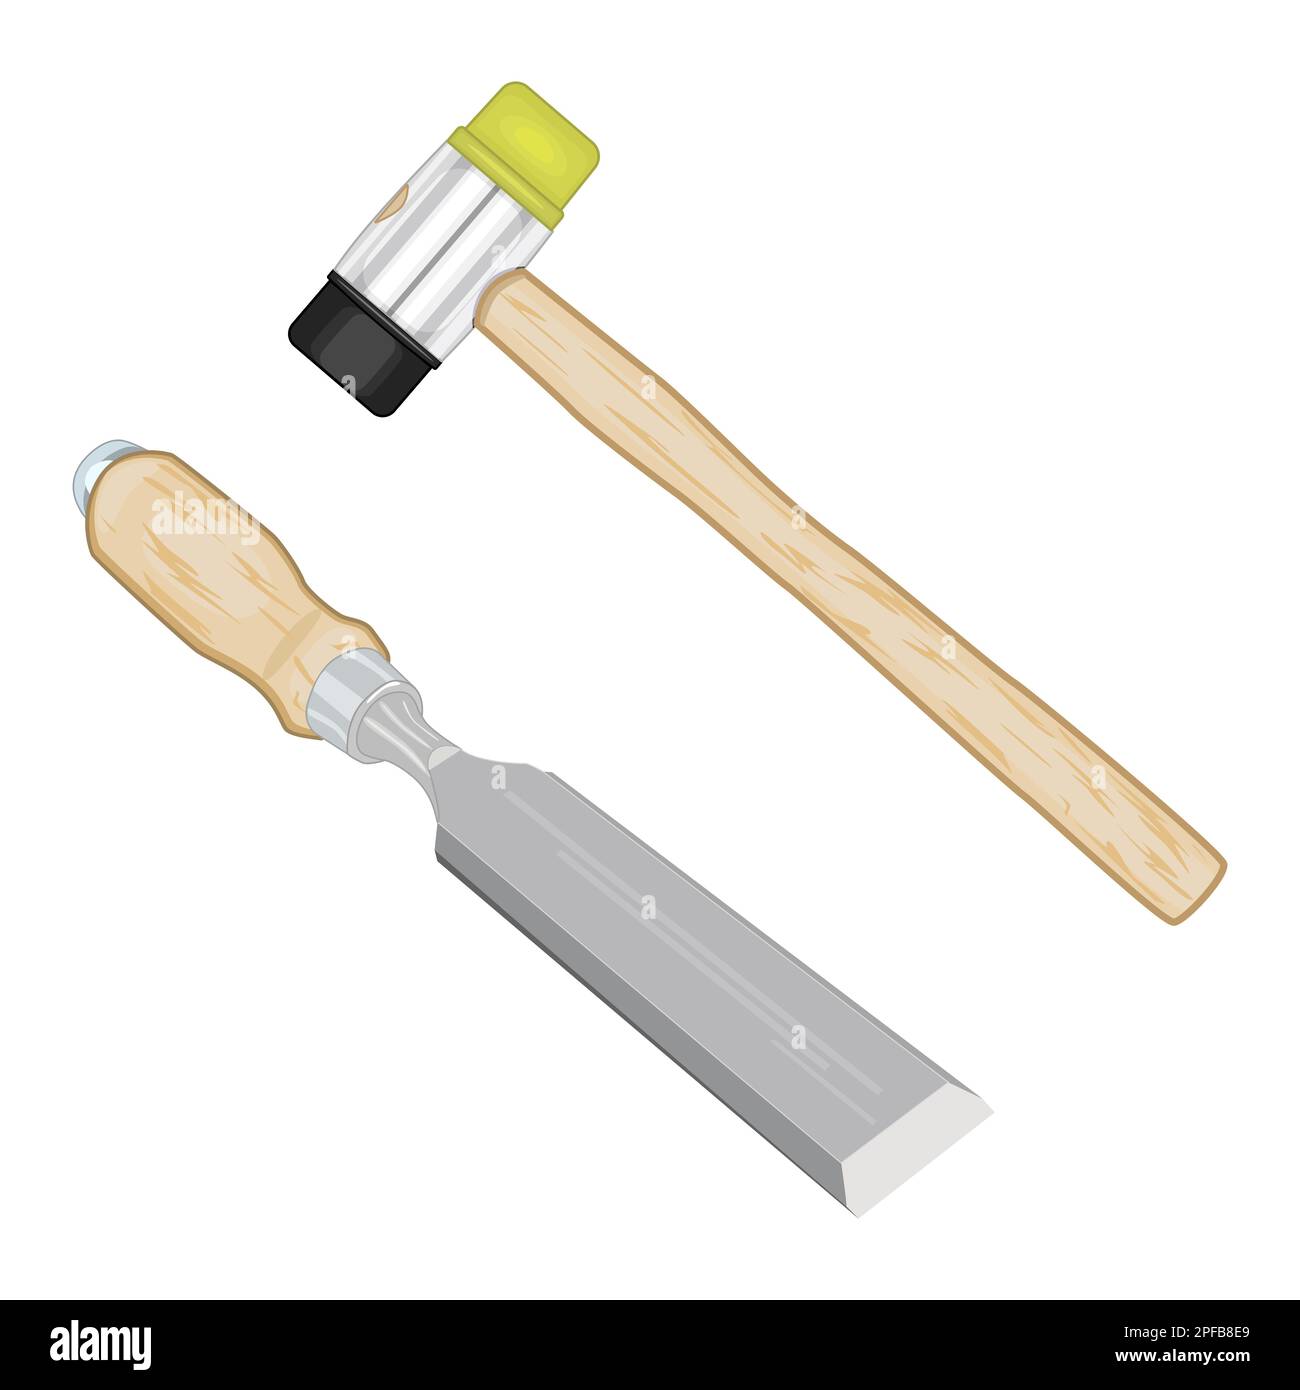 Chisel and mallet isolated on white background. Rubber hammer and chisel with wooden handle.Woodwork and carpentry tools set.Stock vector illustration Stock Vector